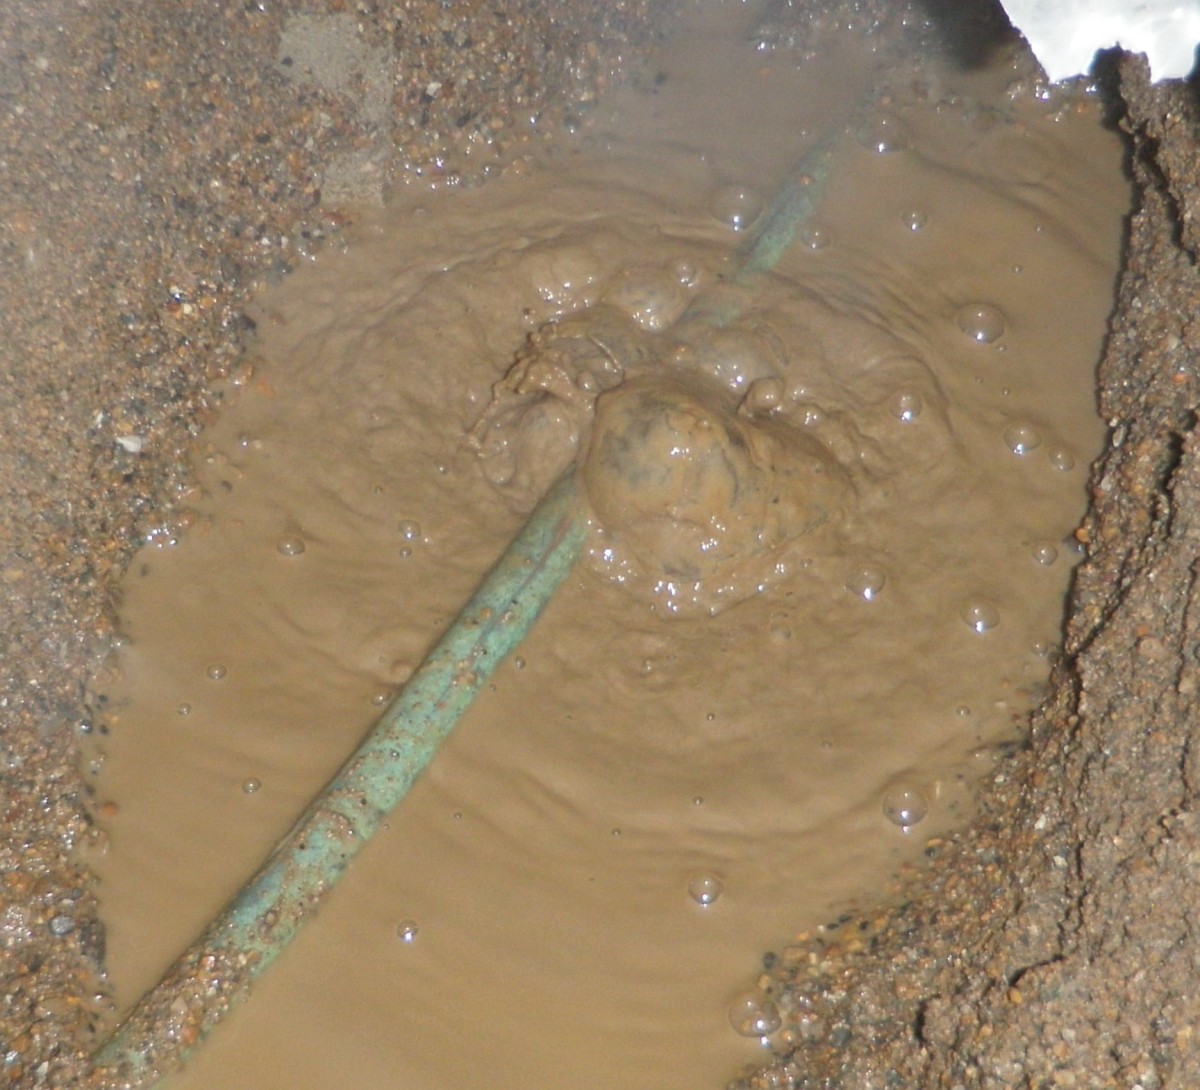 This pinhole leak on a service line into a home was found by United Leak Detection in Lafayette, Indiana.